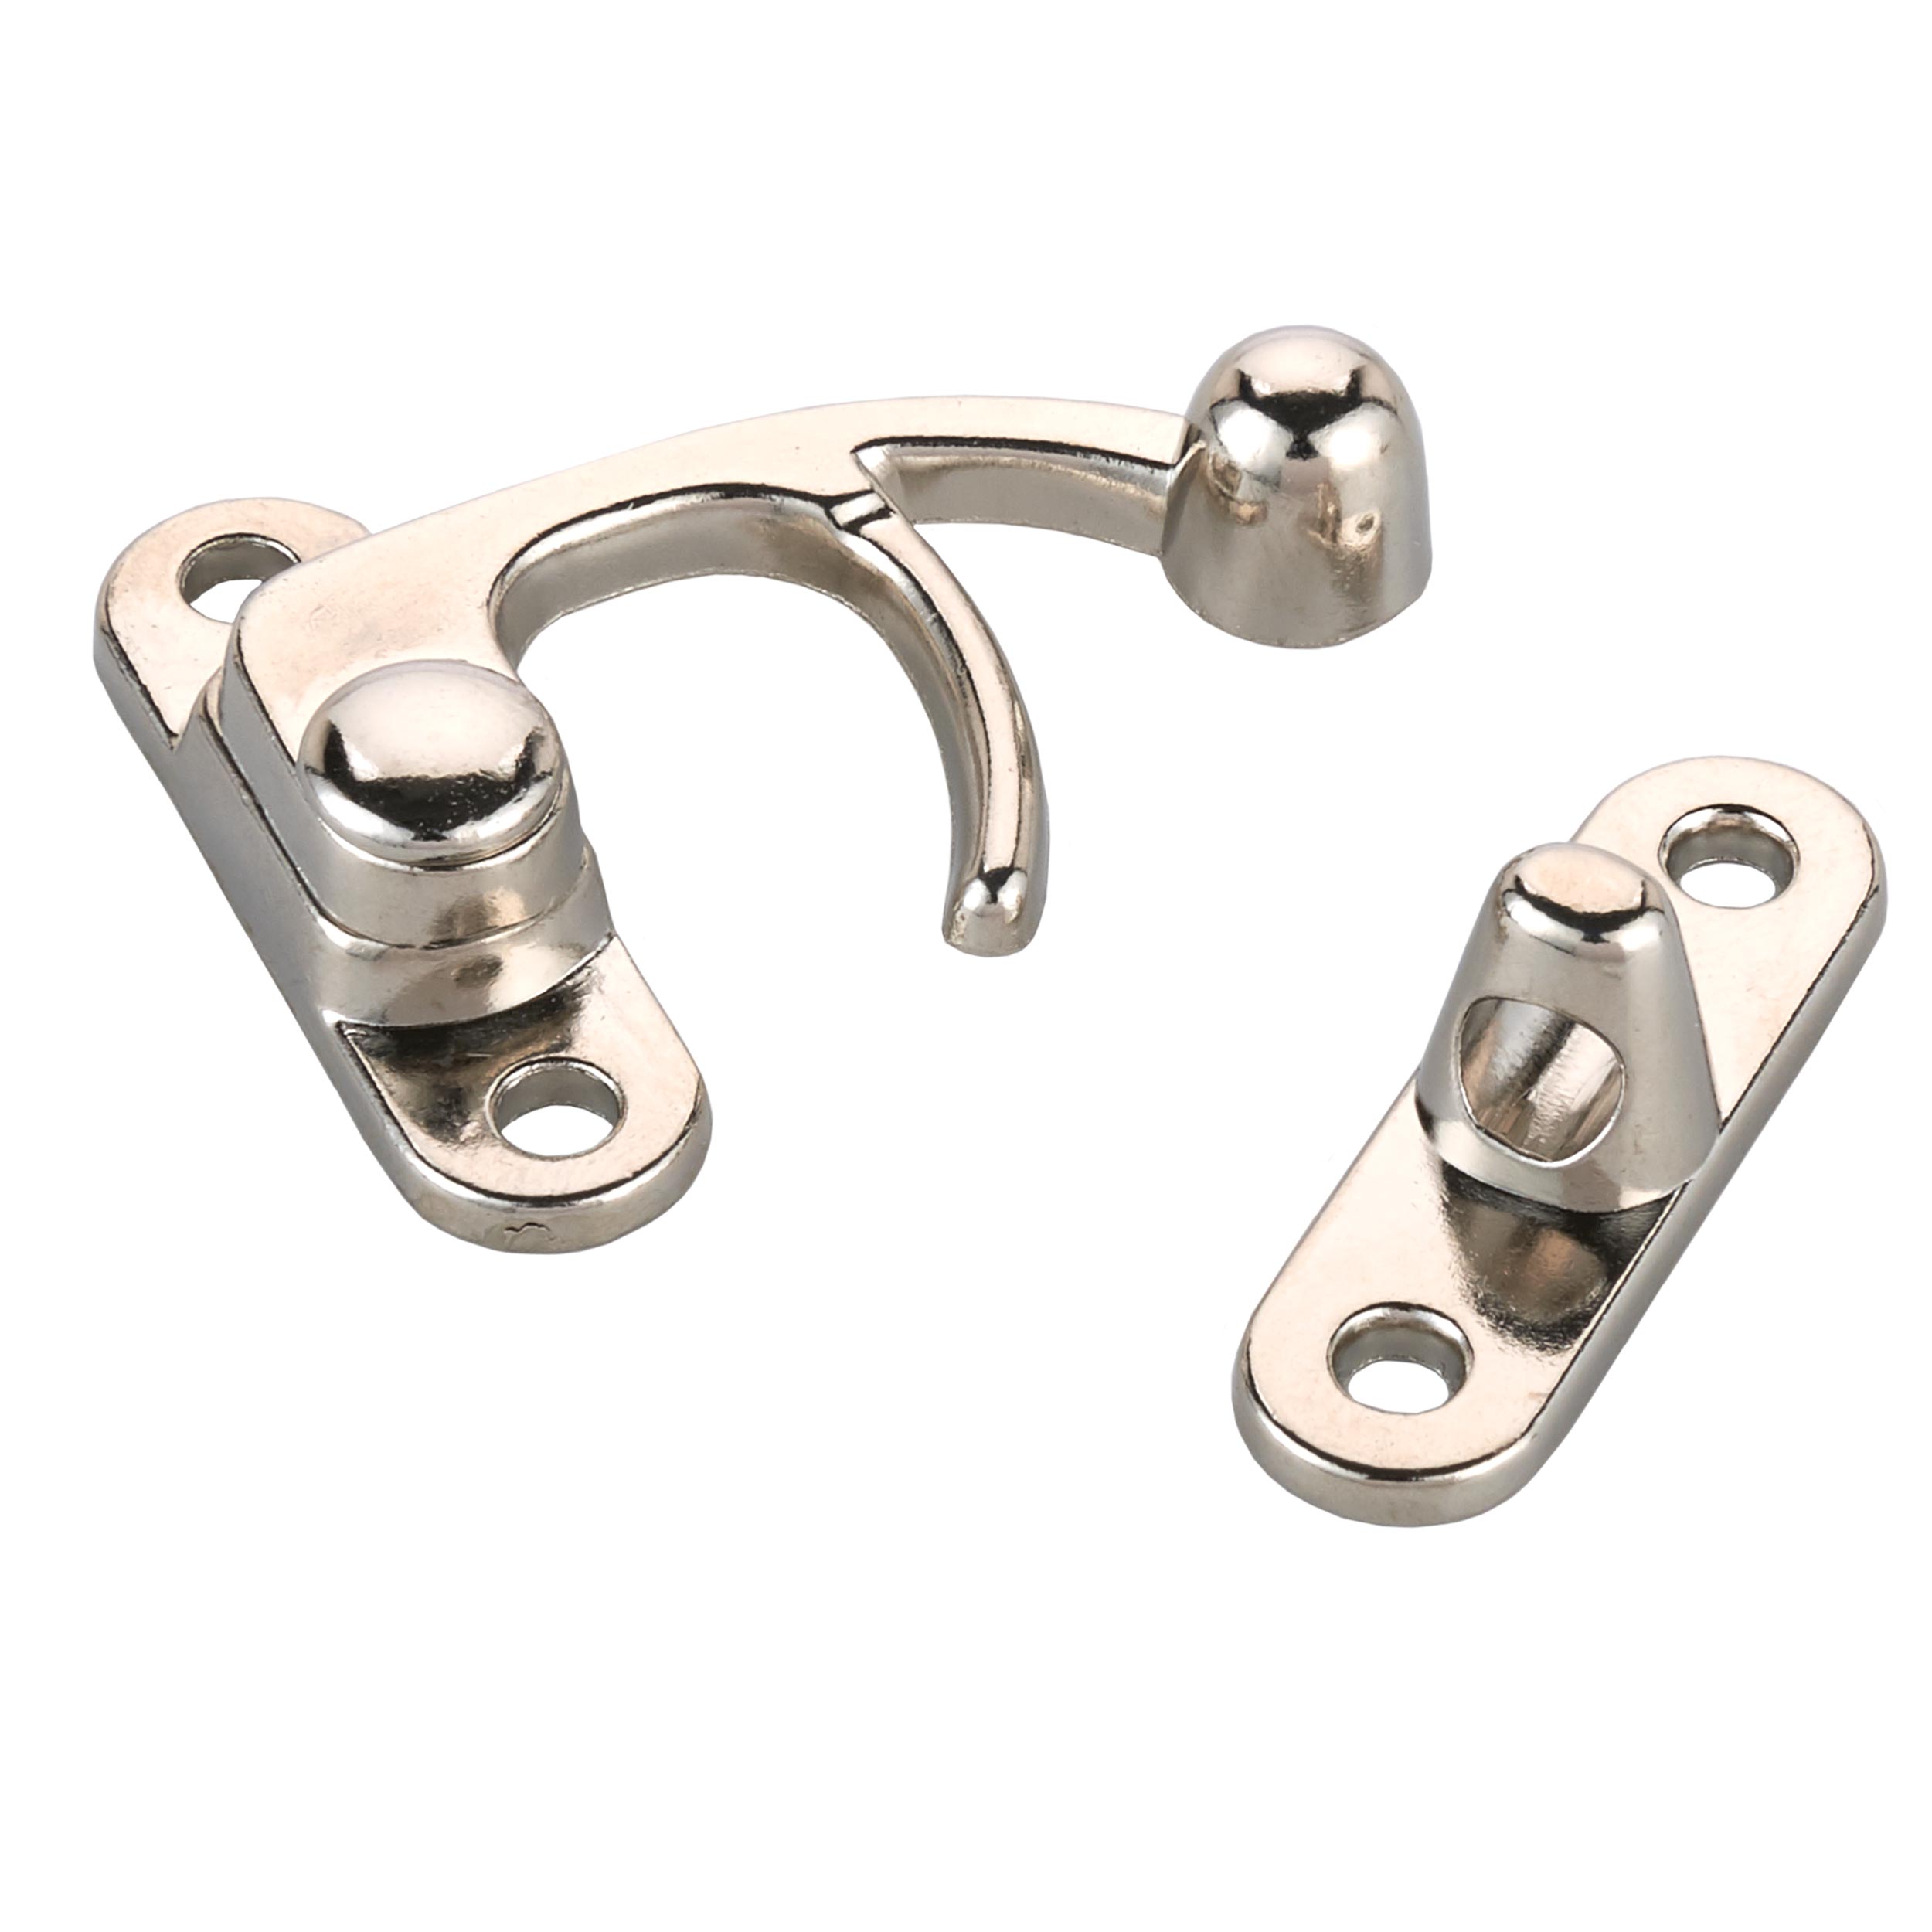 Hook Latch Large Nickel Finish 1-piece With Screws